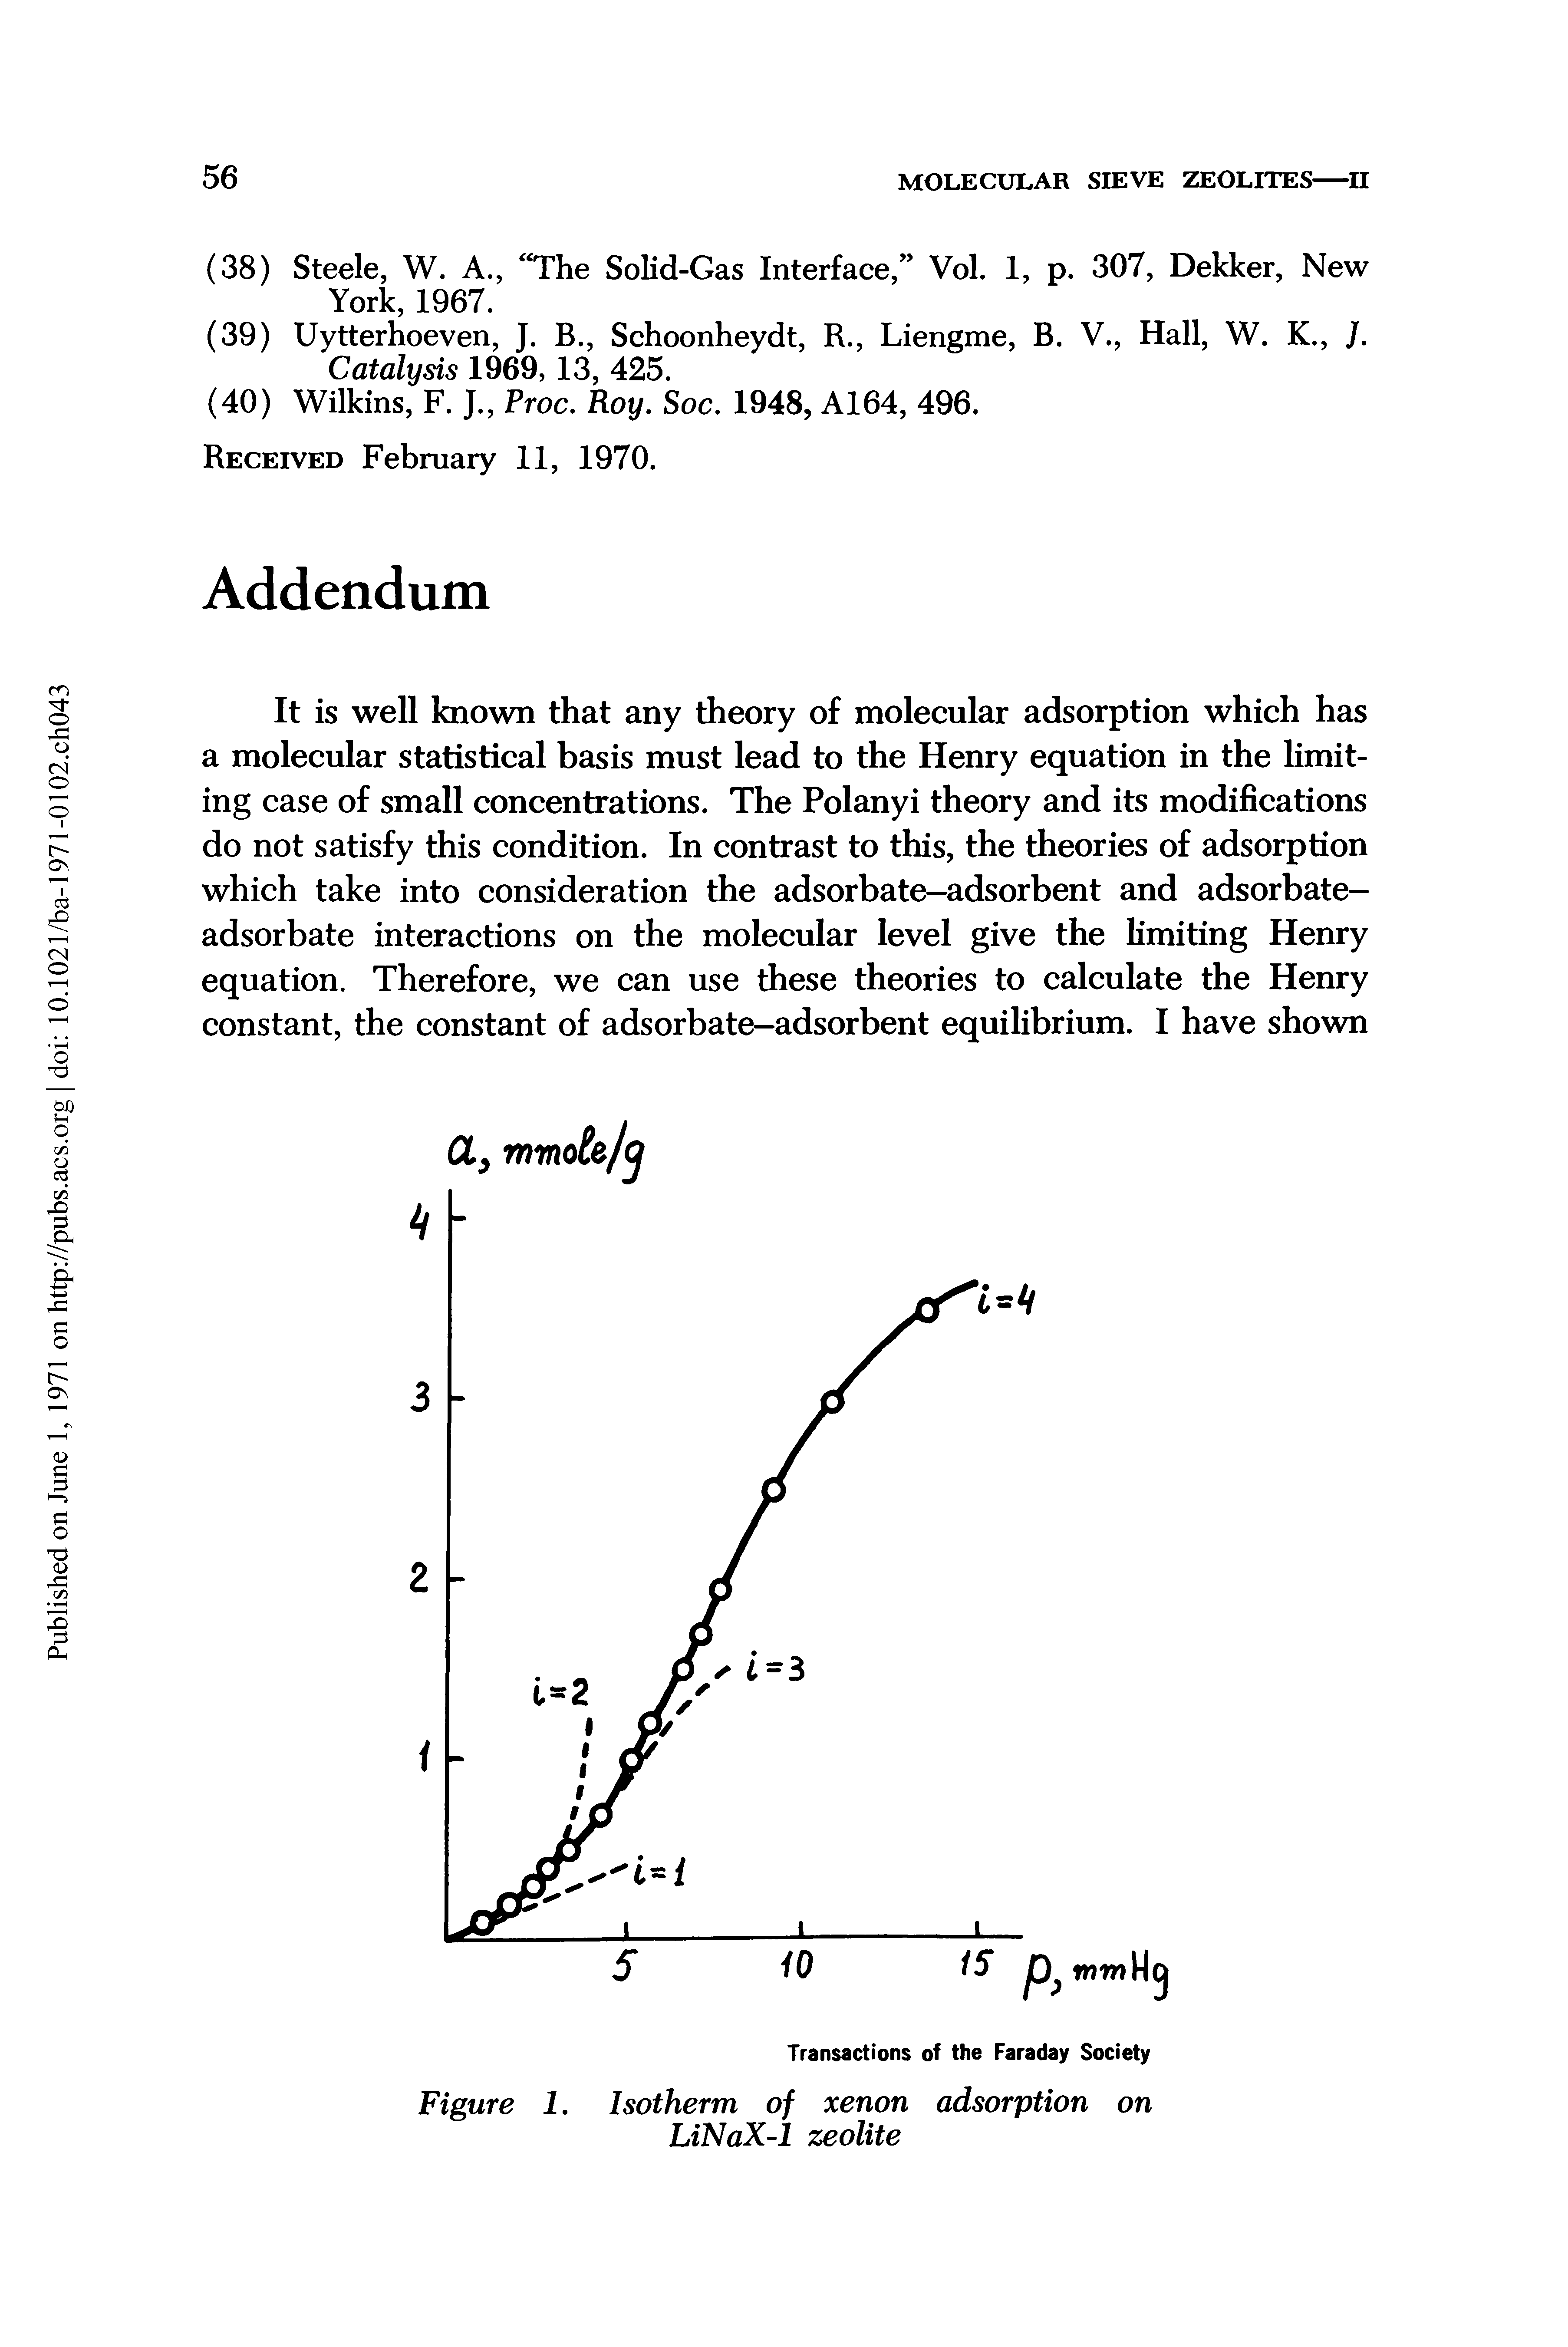 Figure 1. Isotherm of xenon adsorption on LiNaX-1 zeolite...